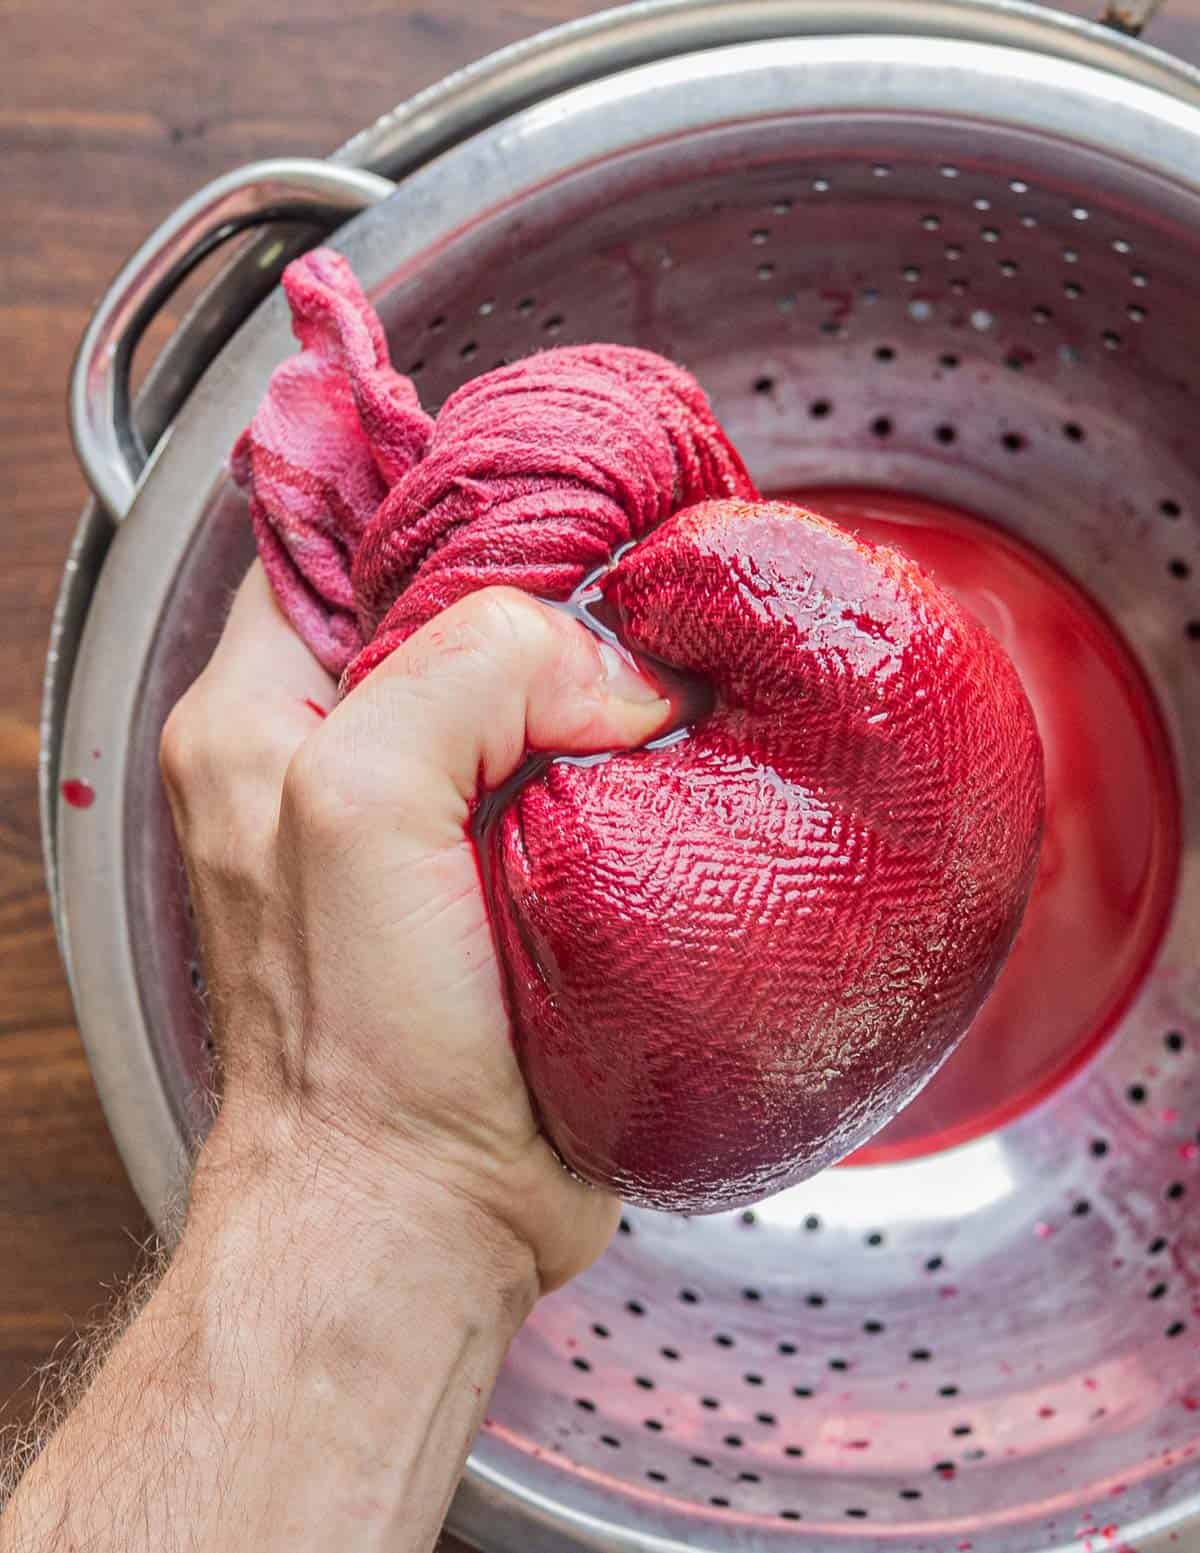 Squeezing cherry juice from cooked wild cherries wrapped in cheesecloth. 